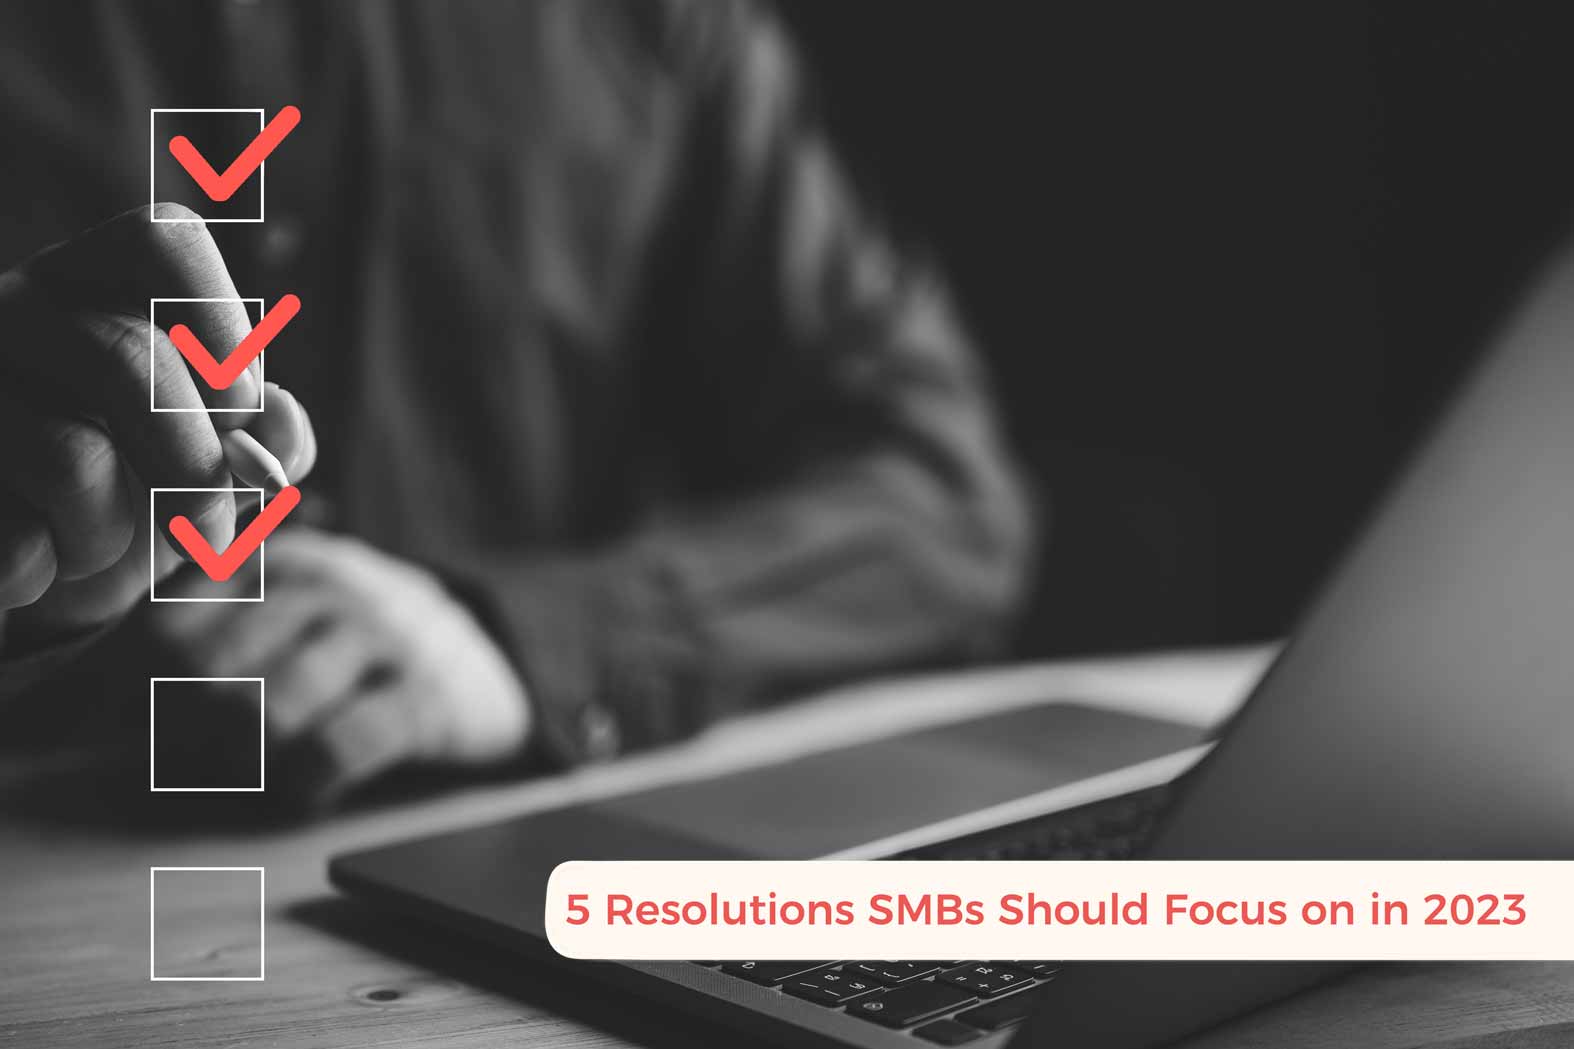 5 Resolutions SMBs Should Focus on in 2023